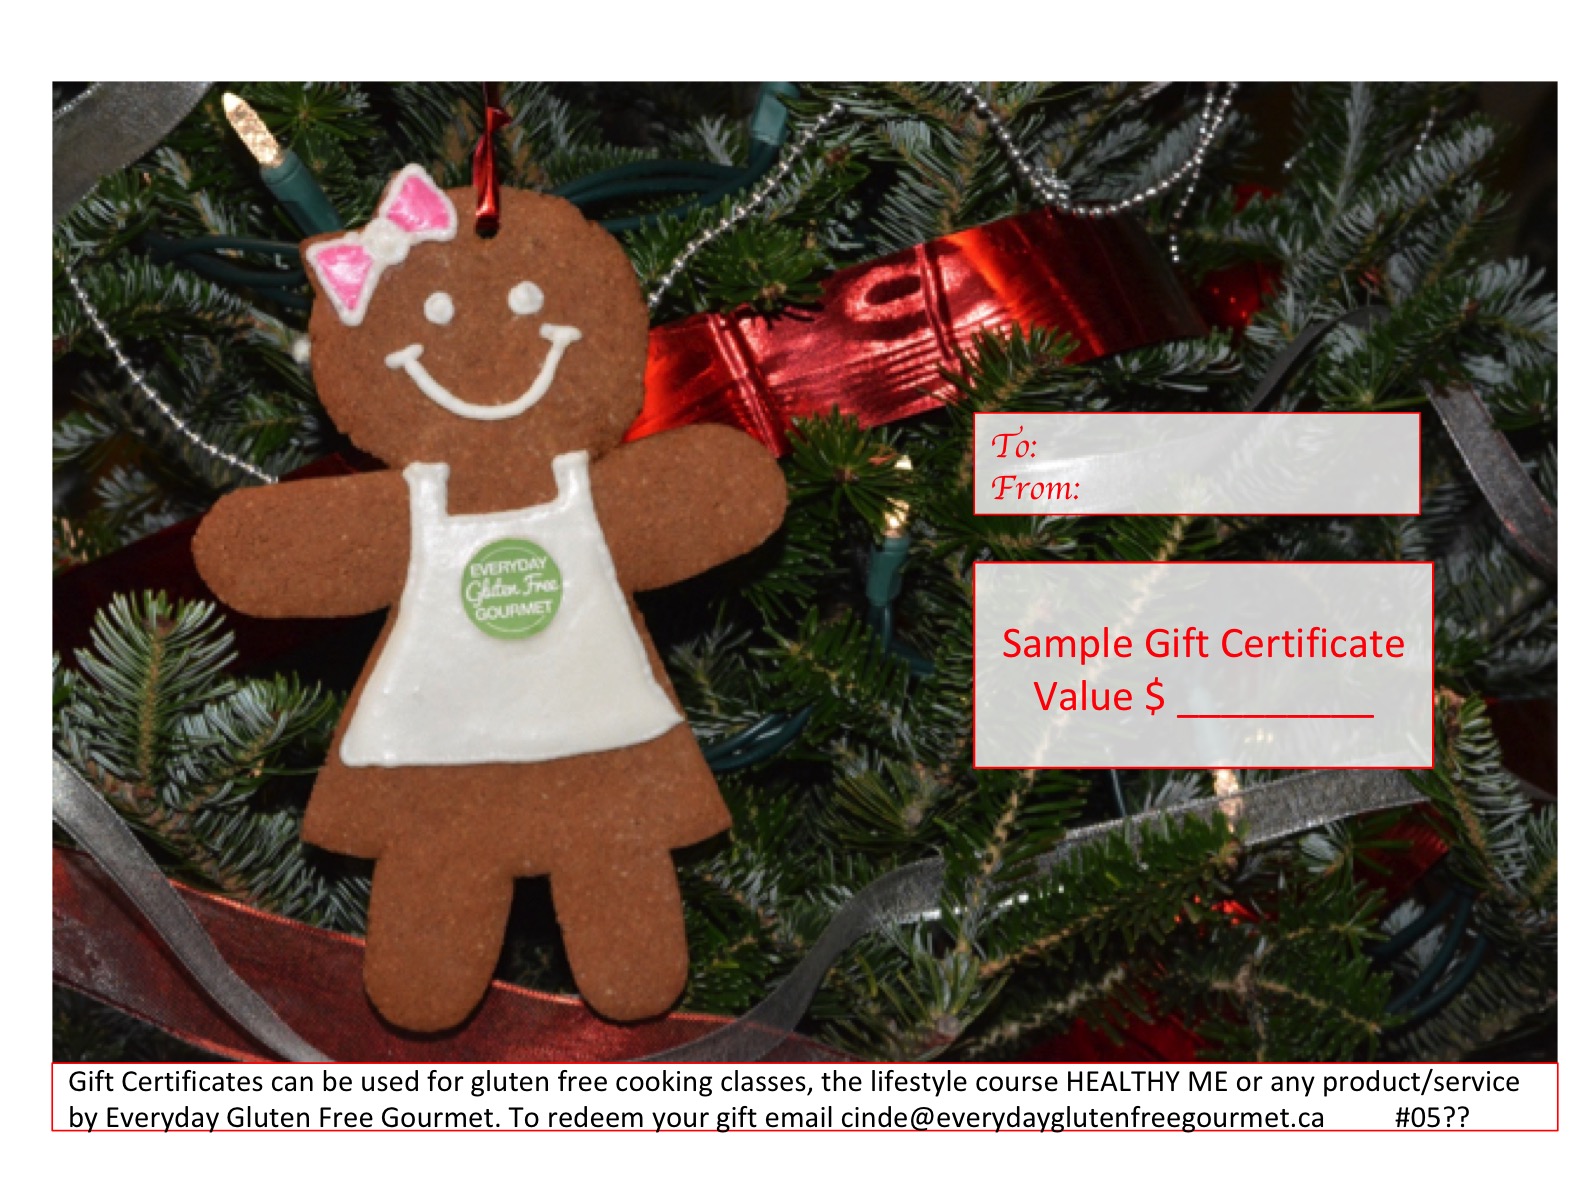 Sample Christmas Gift Certificate for purchase.